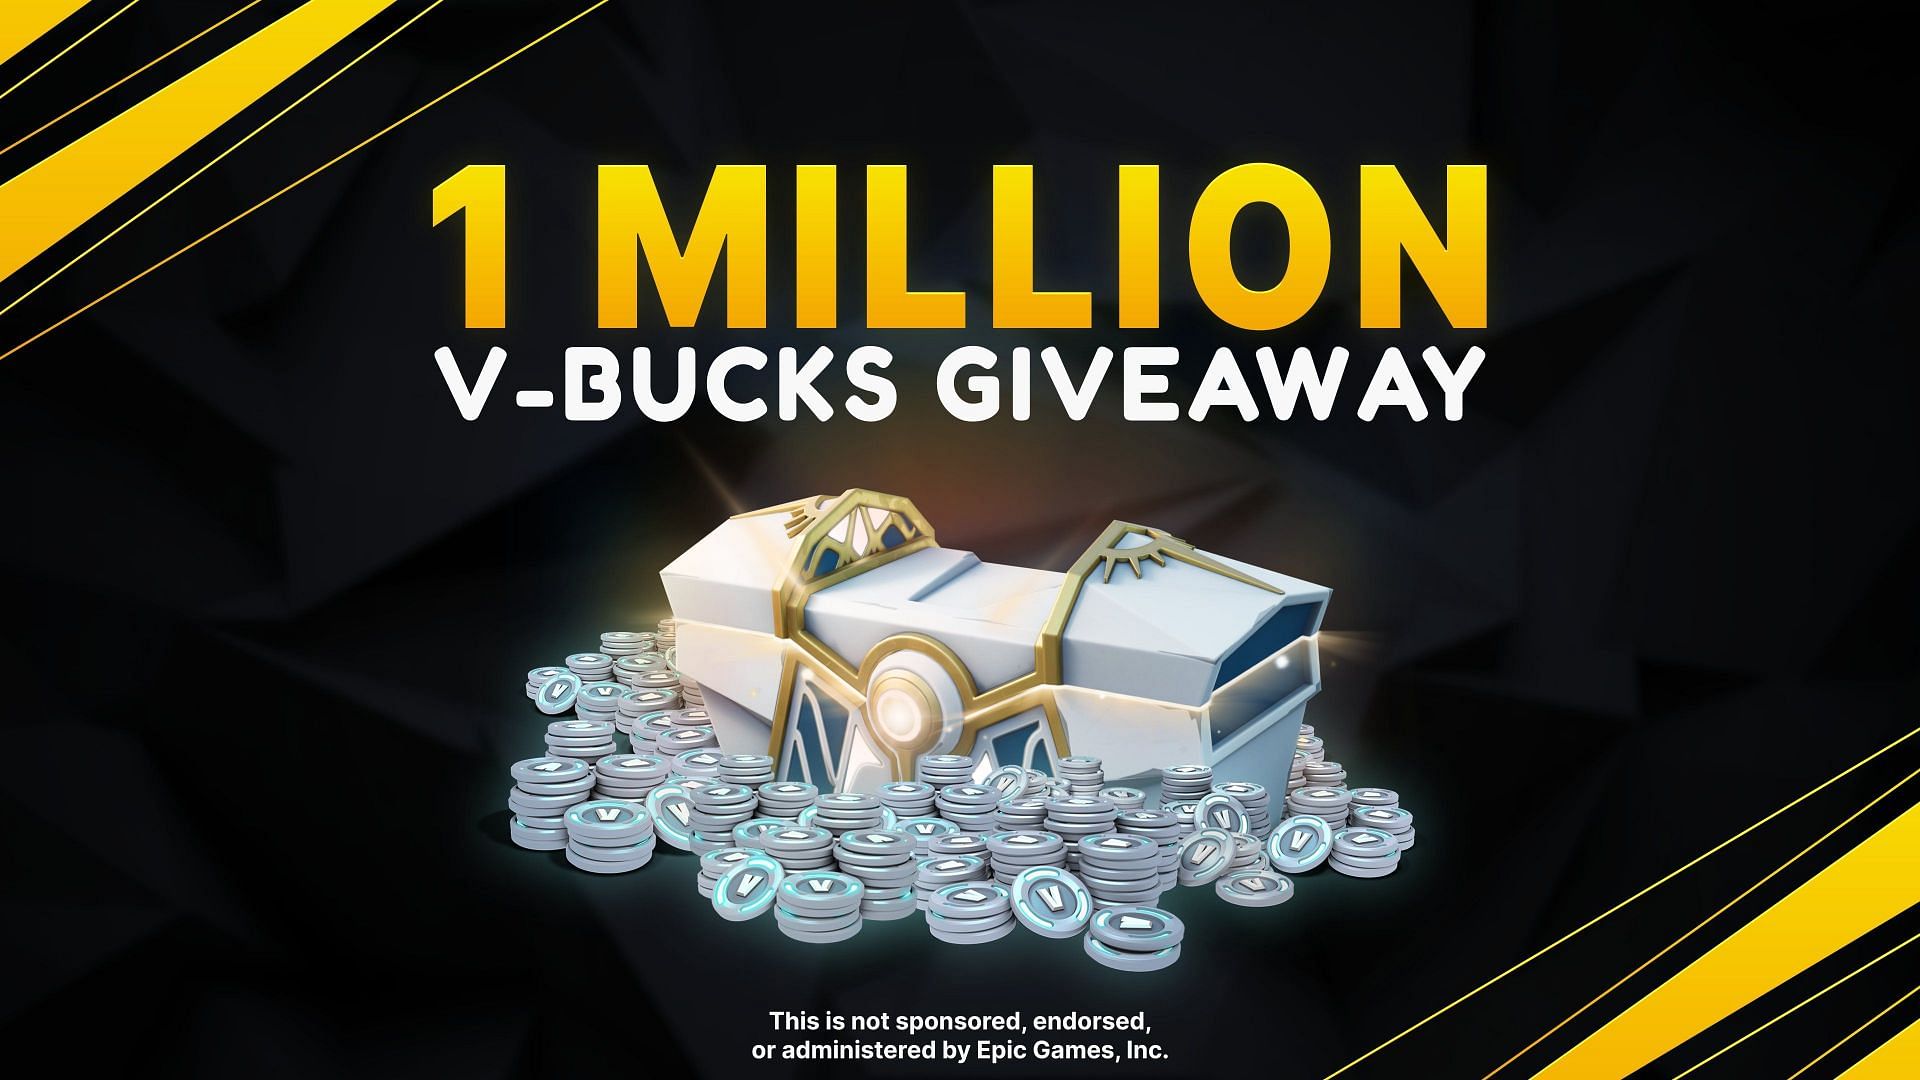 Fortnite players can participate in VBucks giveaway of 1 million, here